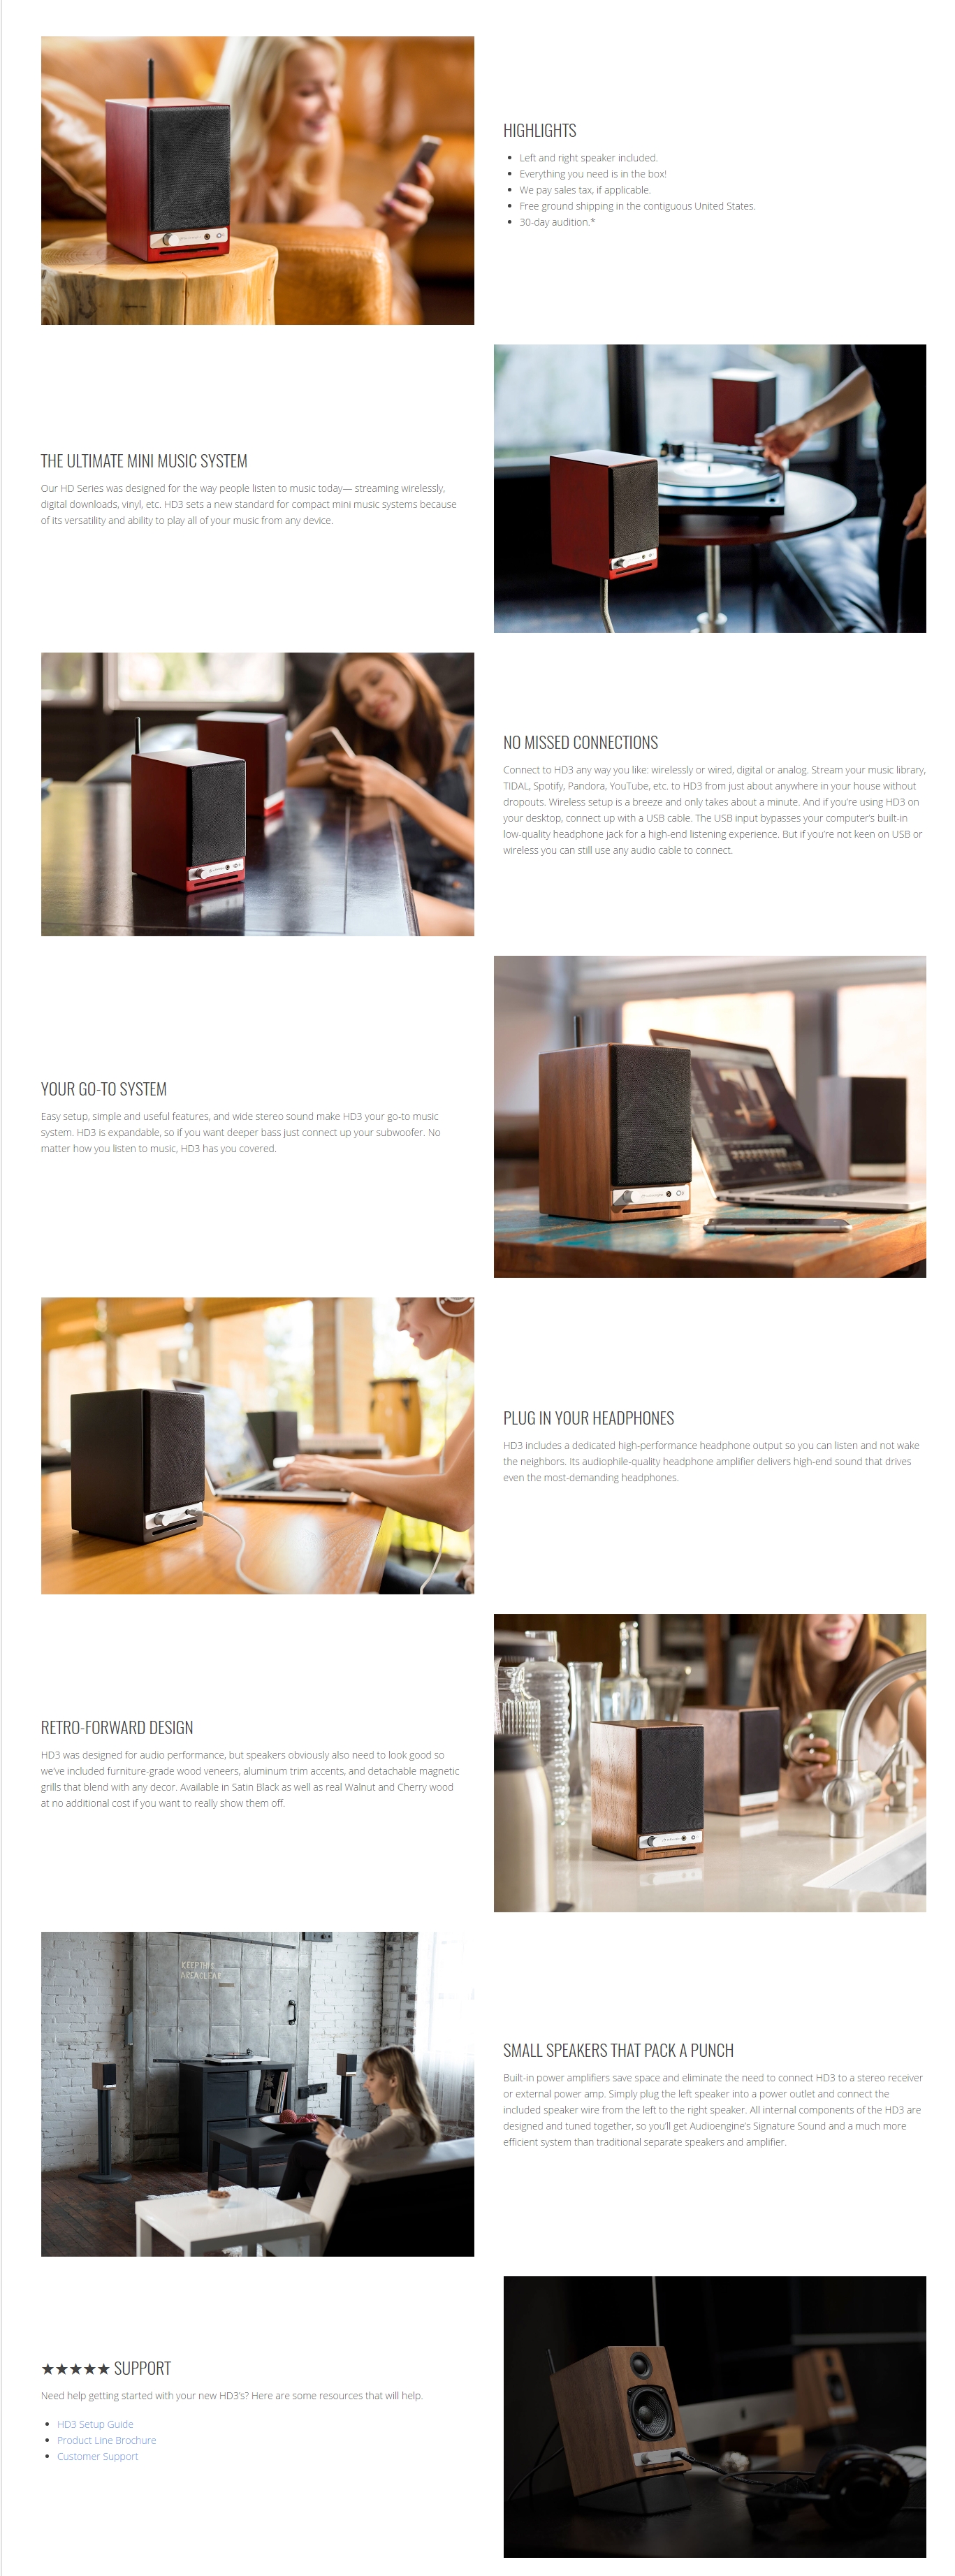 A large marketing image providing additional information about the product Audioengine HD3 - Wireless Desktop Speakers (Satin Black) - Additional alt info not provided